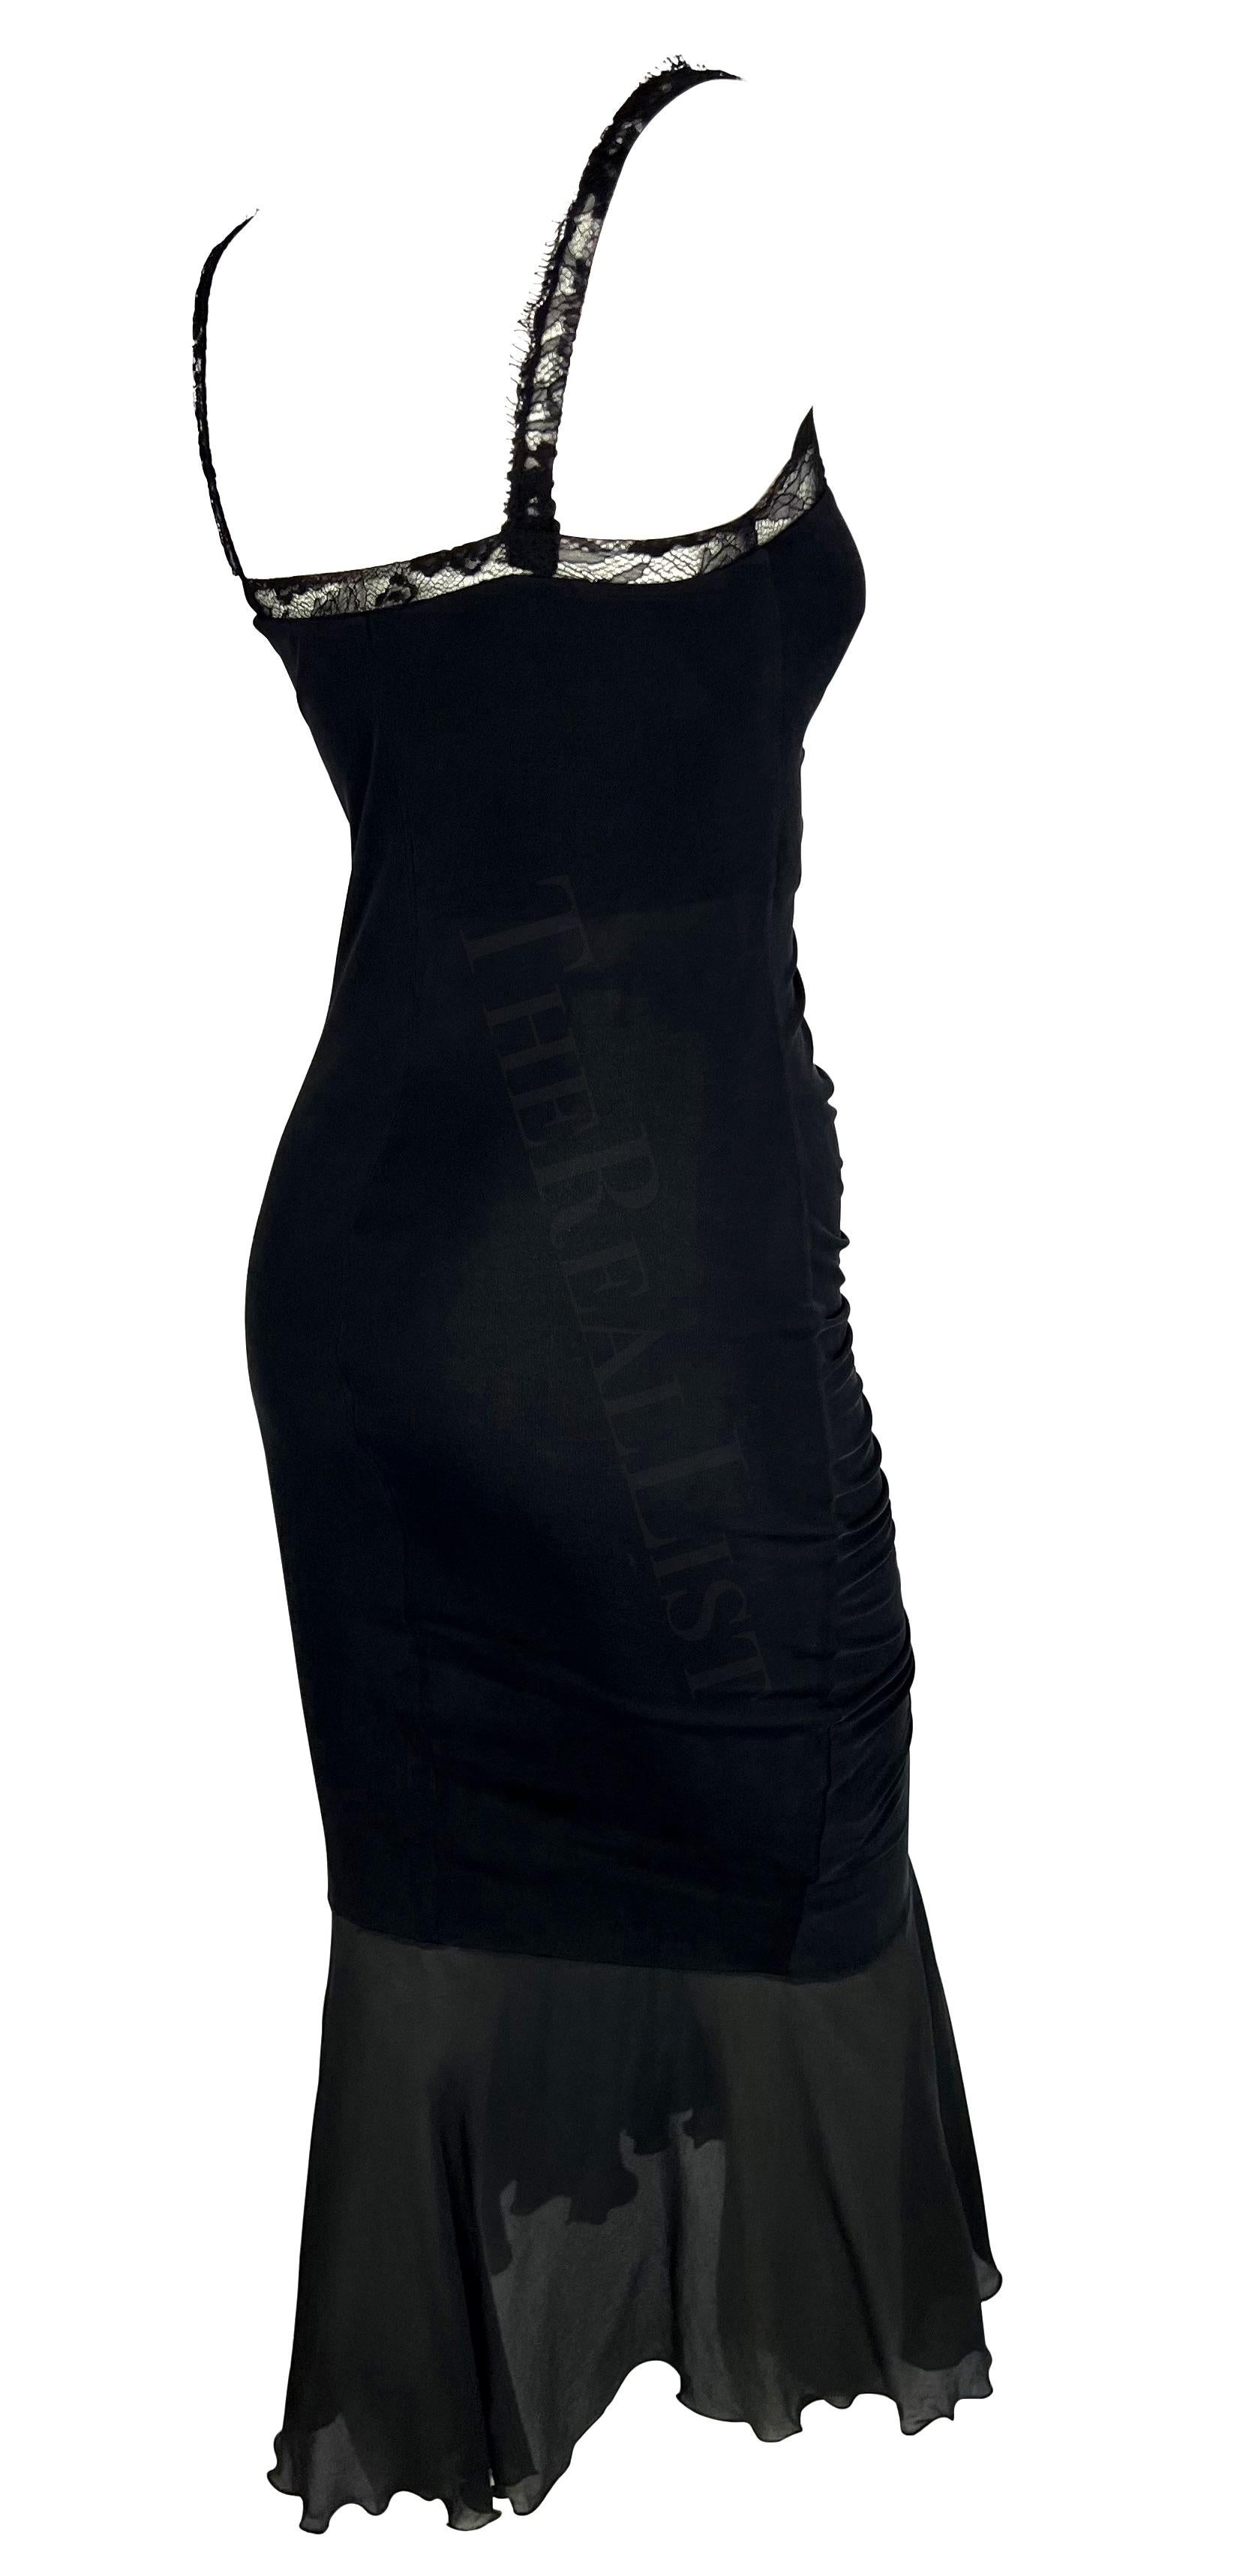 2000s Emanuel Ungaro Ruched Black Slinky Bodycon Dress Lace Strap For Sale 3